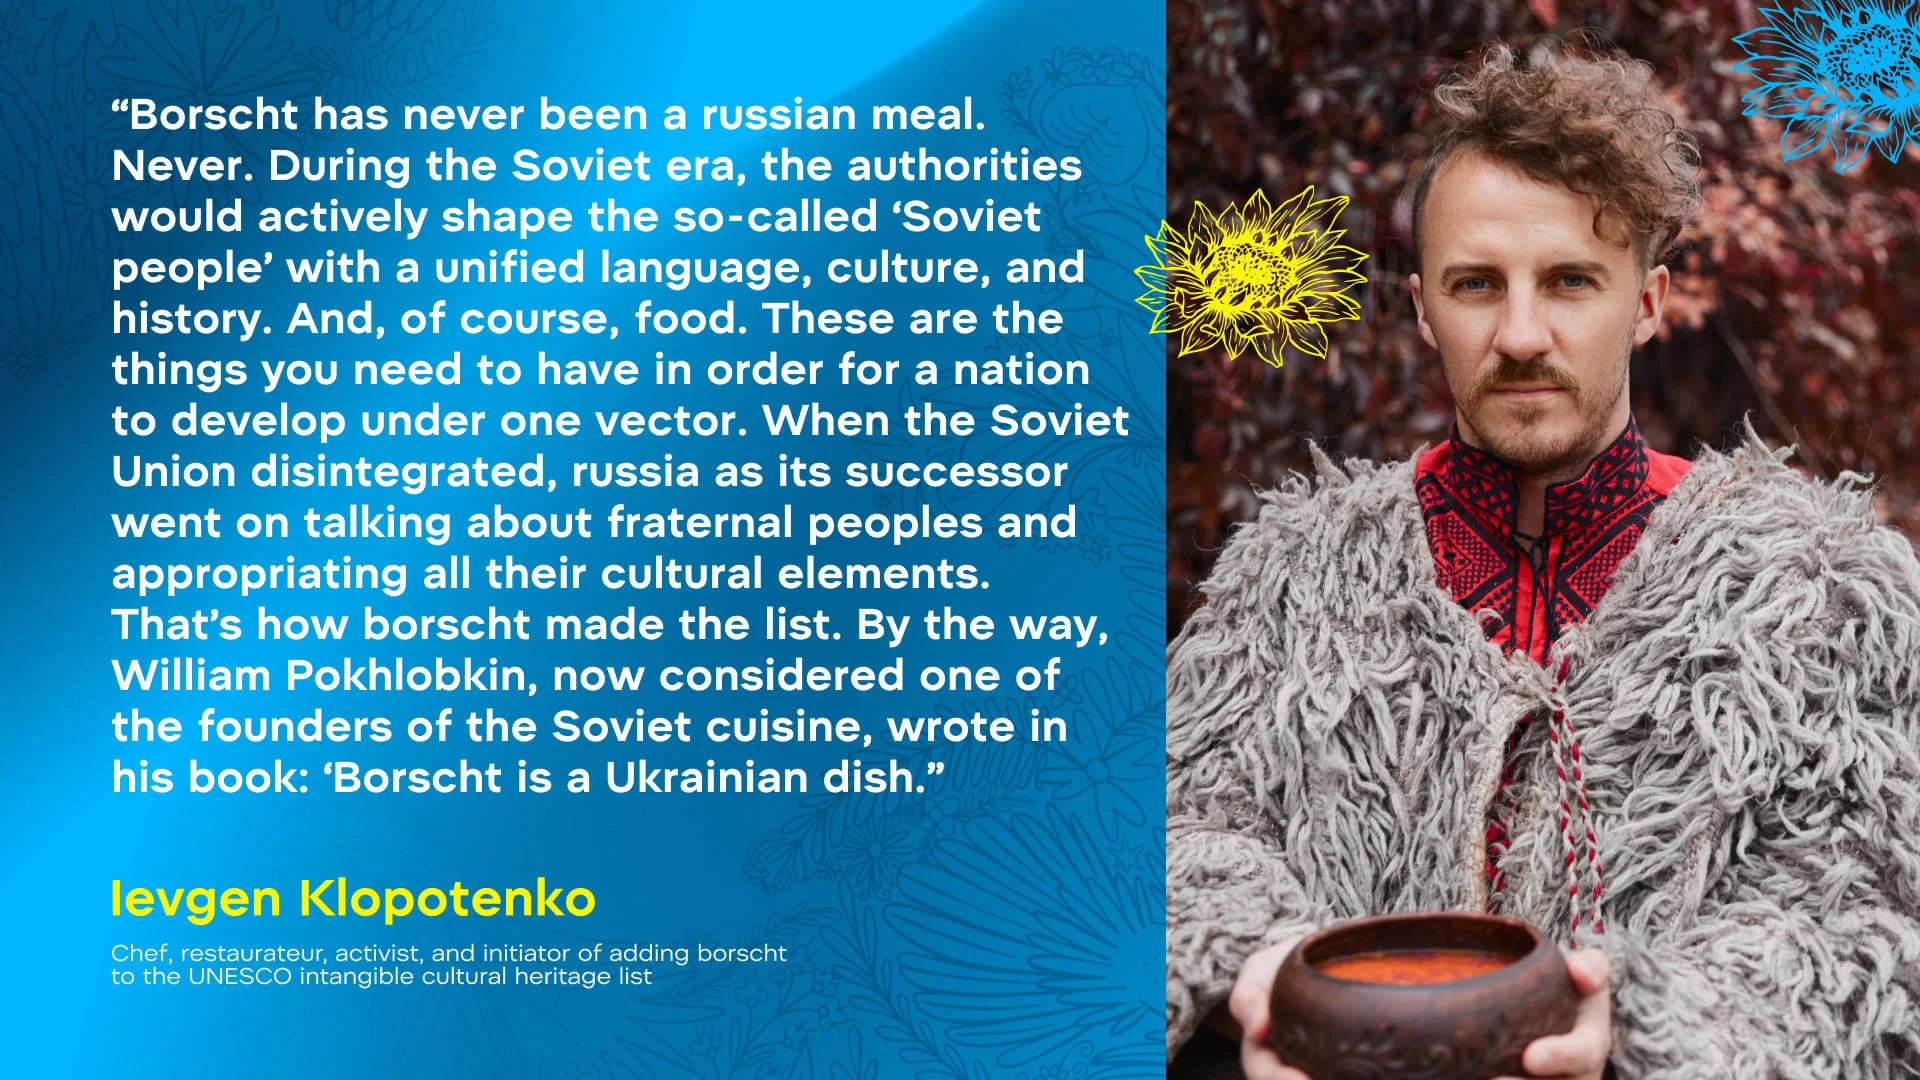 Ievgen Klopotenko, chef, restaurateur, activist, and initiator of adding borscht to the UNESCO intangible cultural heritage list. Credit: WePlay Holding